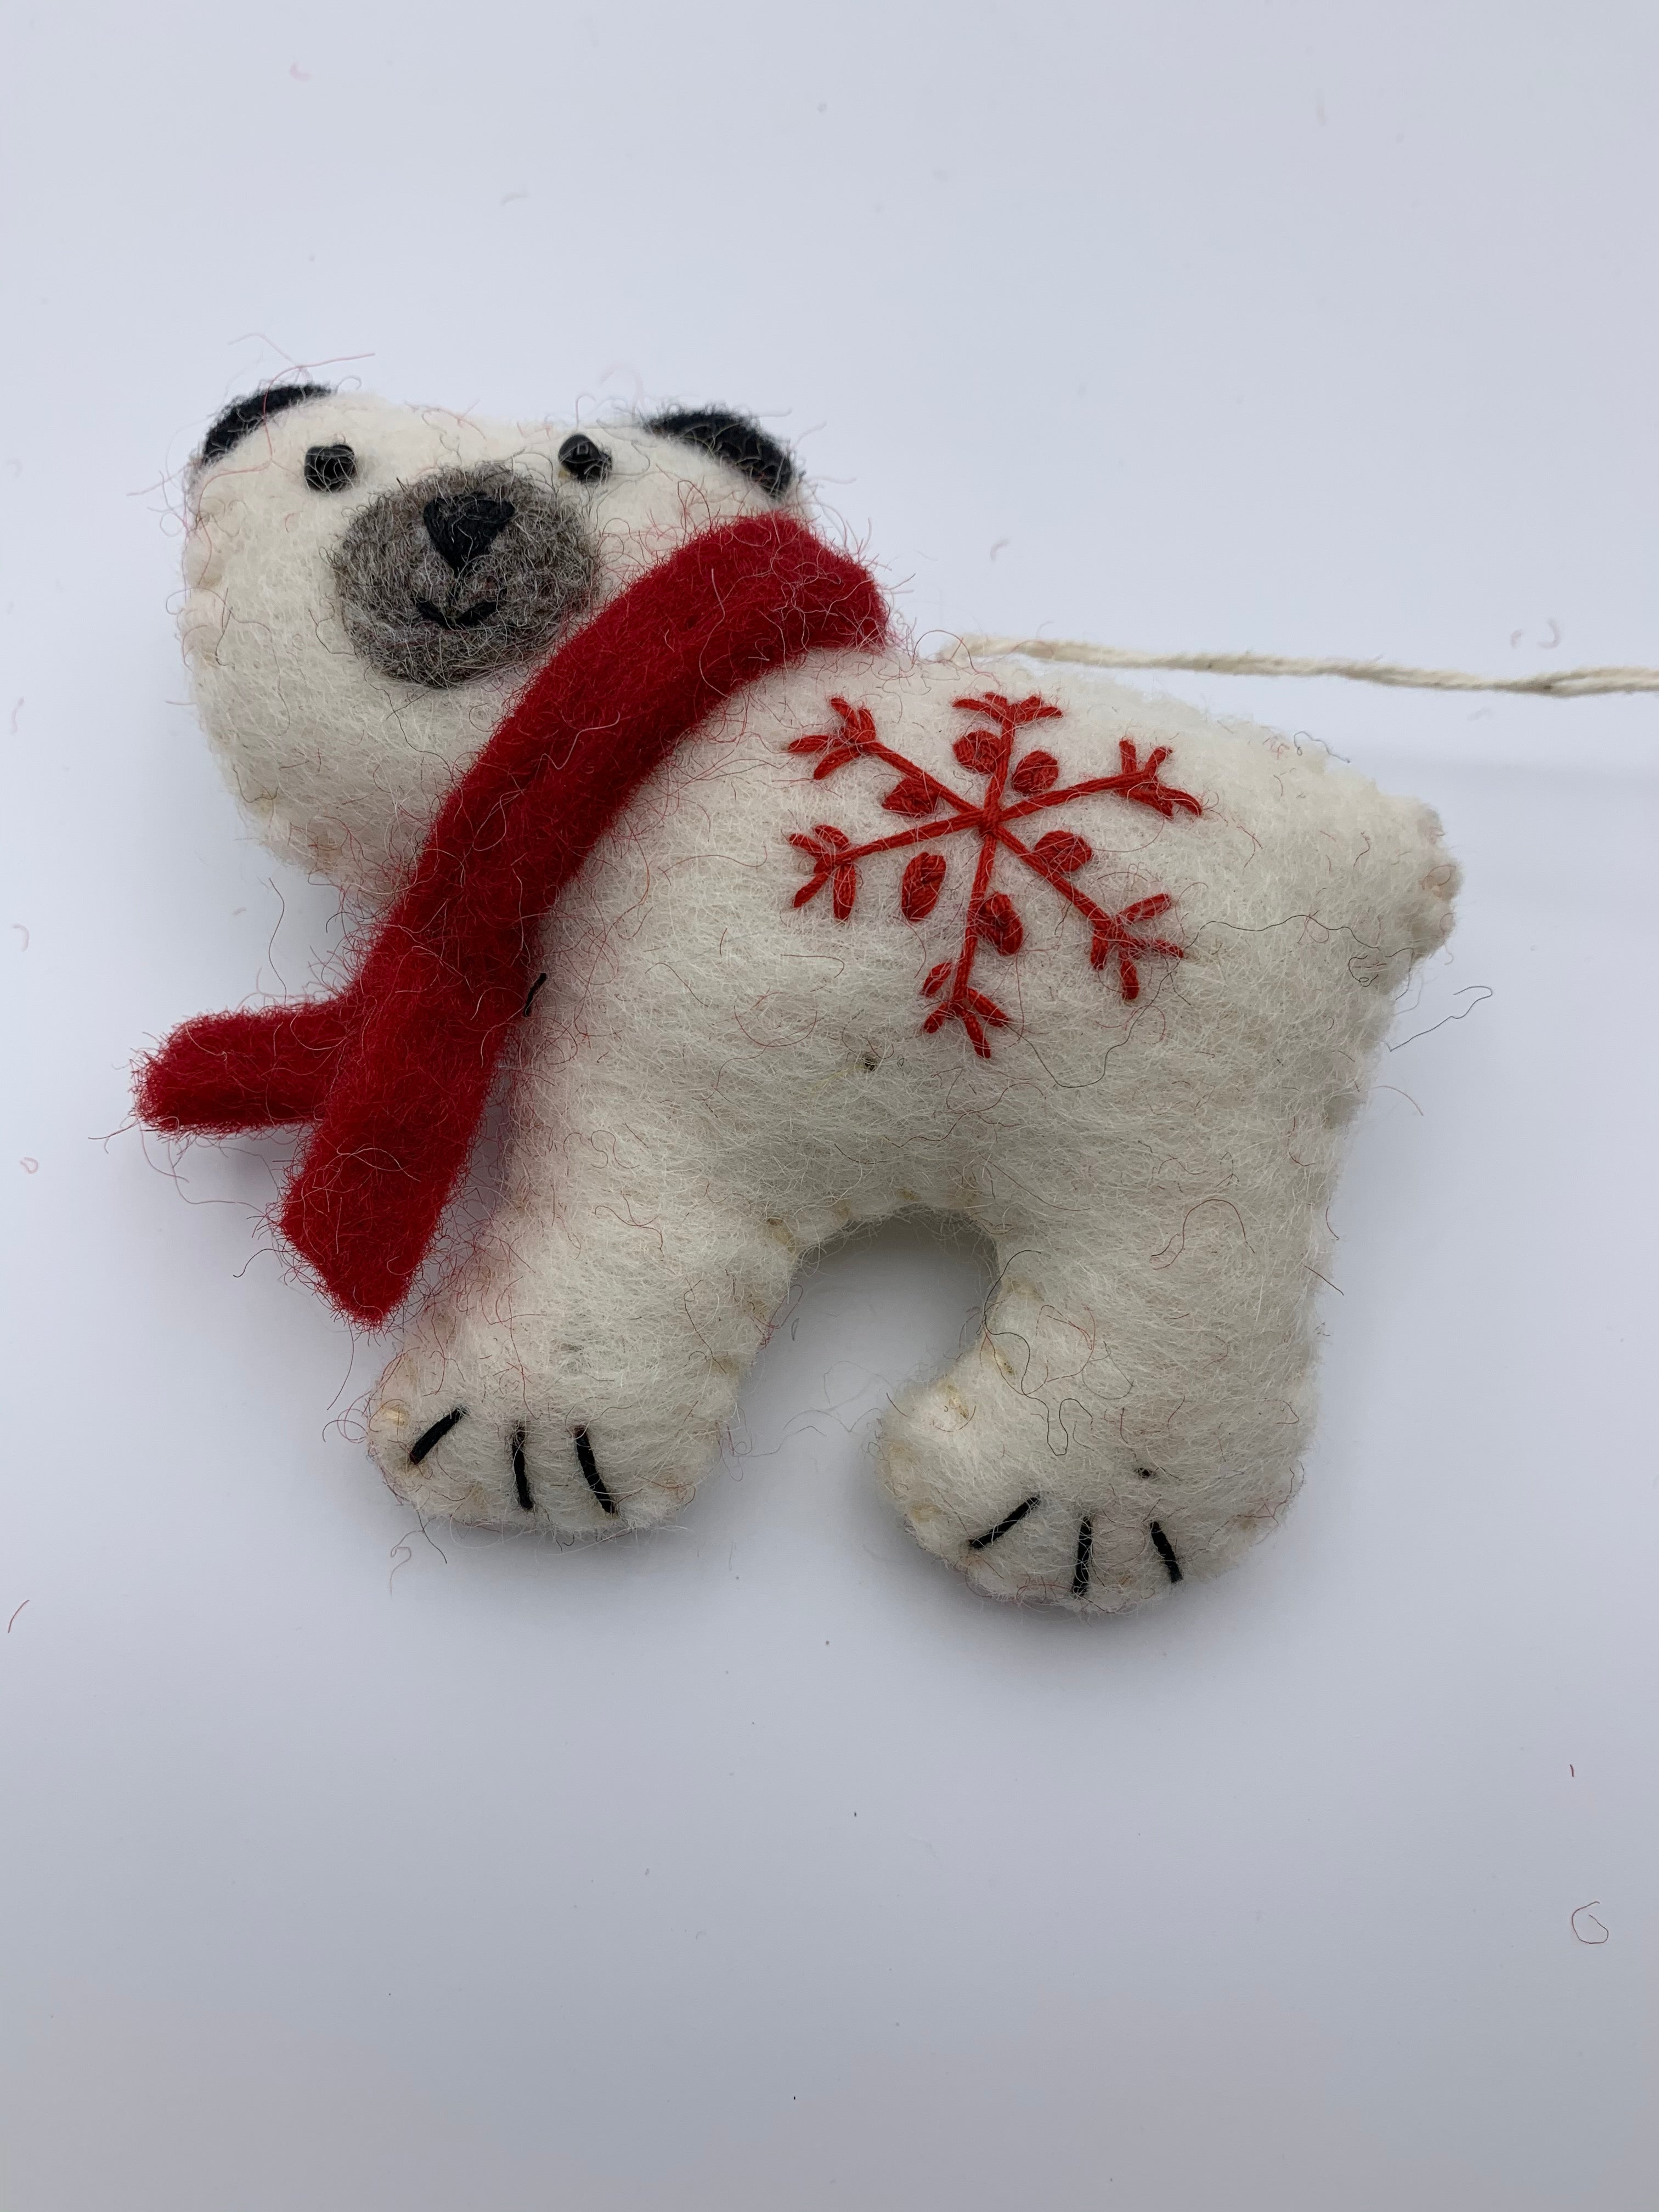 This is a close-up view of the polar bear Christmas ornament that is hand-crafted (fair trade) and made of 100% natural wool. It is off-white with a gray muzzle and black accents (ears, eyes, etc.) and wears a red winter scarf. He has a 'signature' (red) snowflake on his body. Approximately 3.75"x4.2". It comes with a fair trade holiday "to/from" tag to use if giving as a gift.